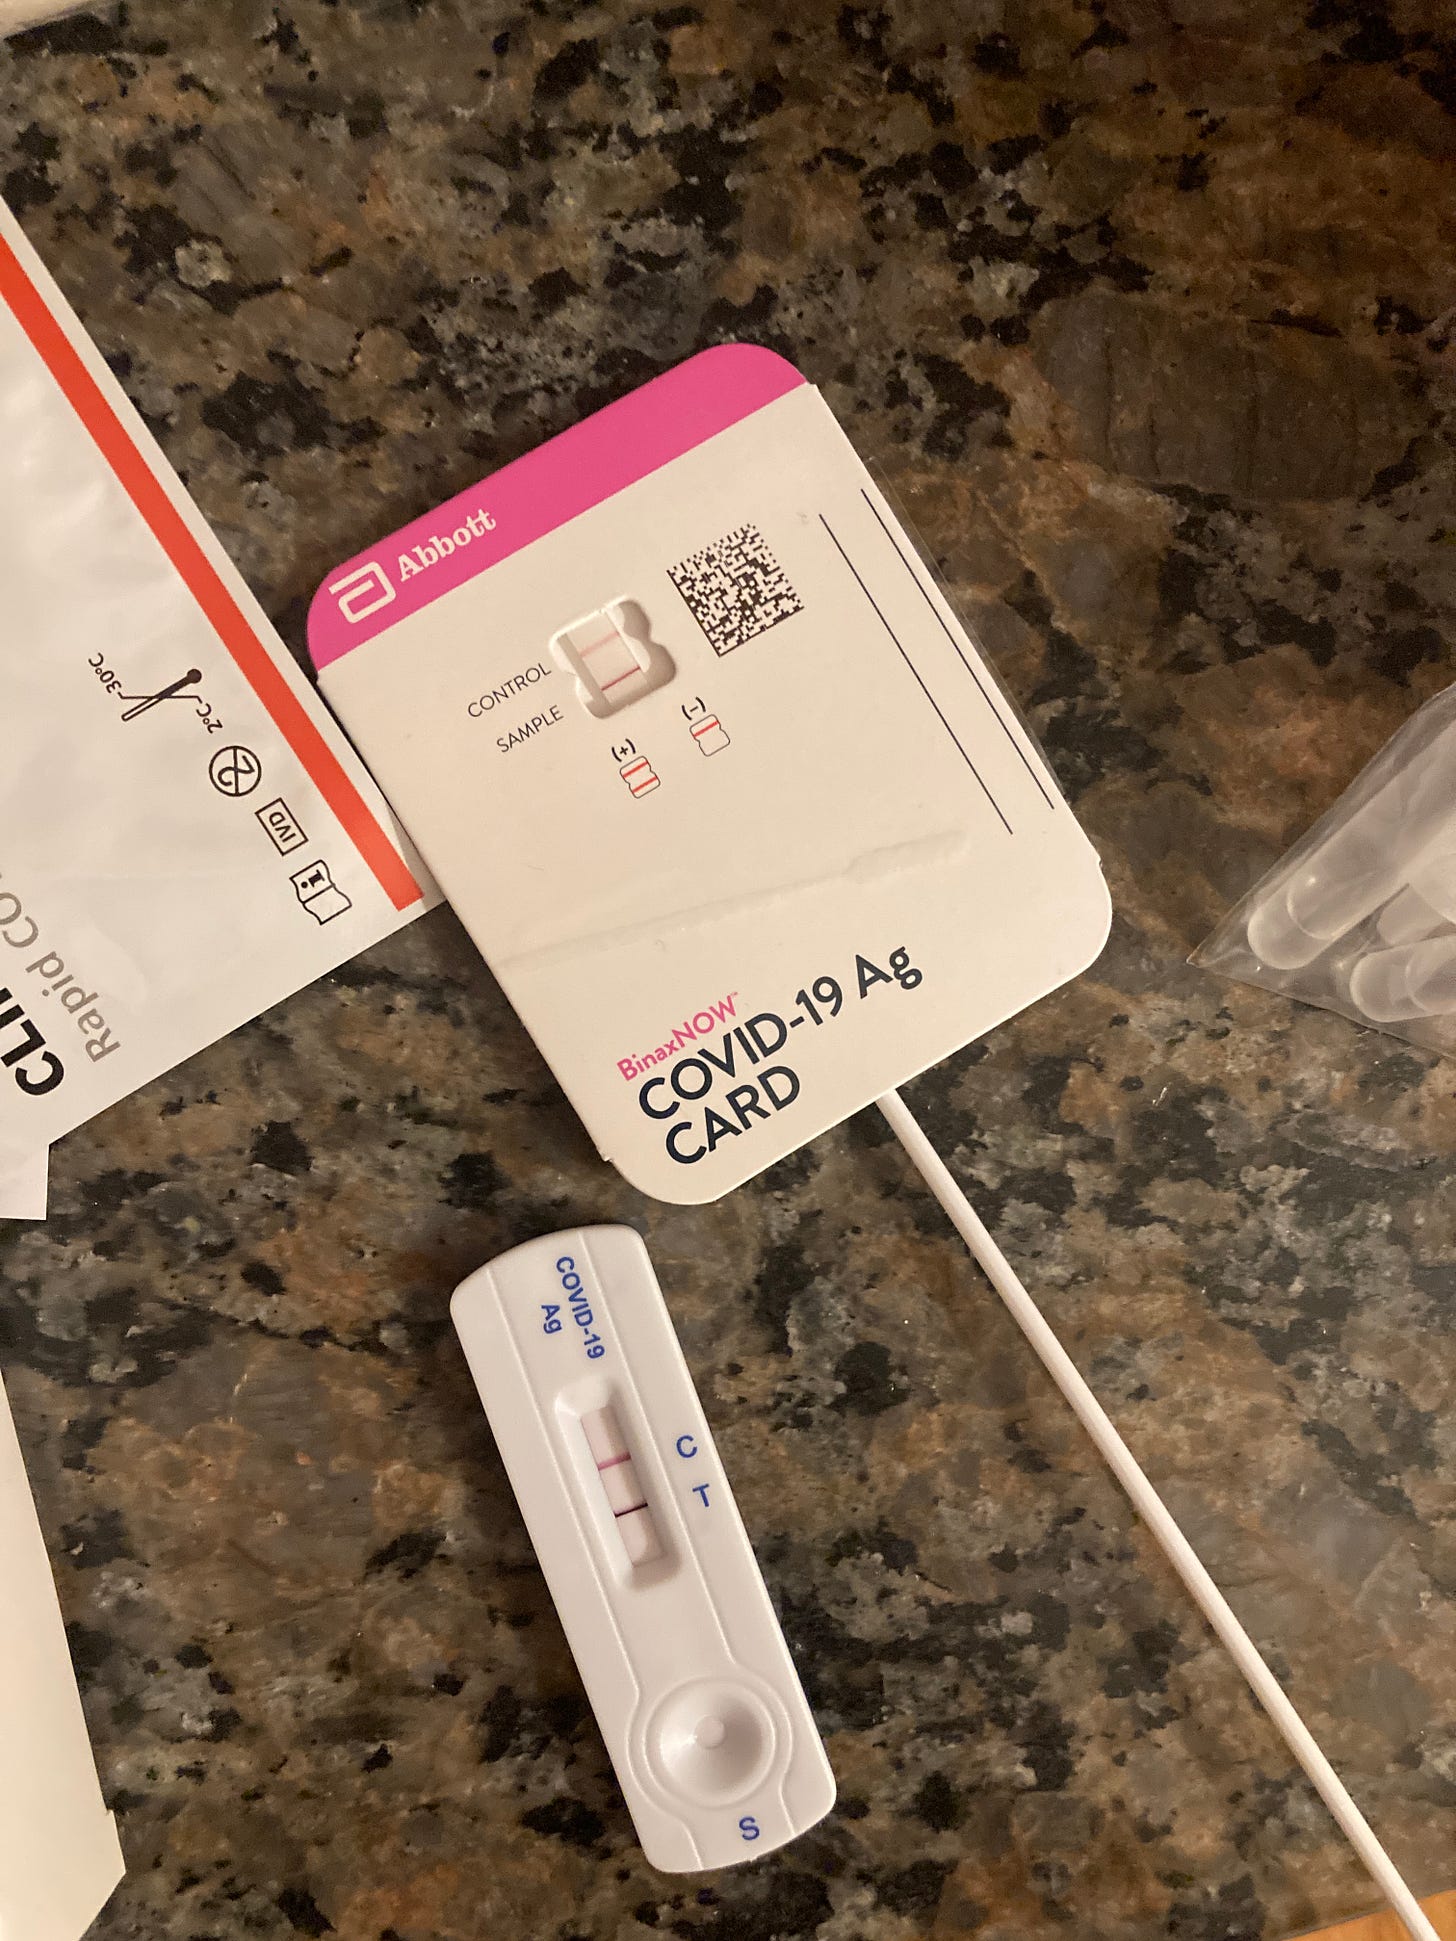 Image of two positive at-home COVID tests